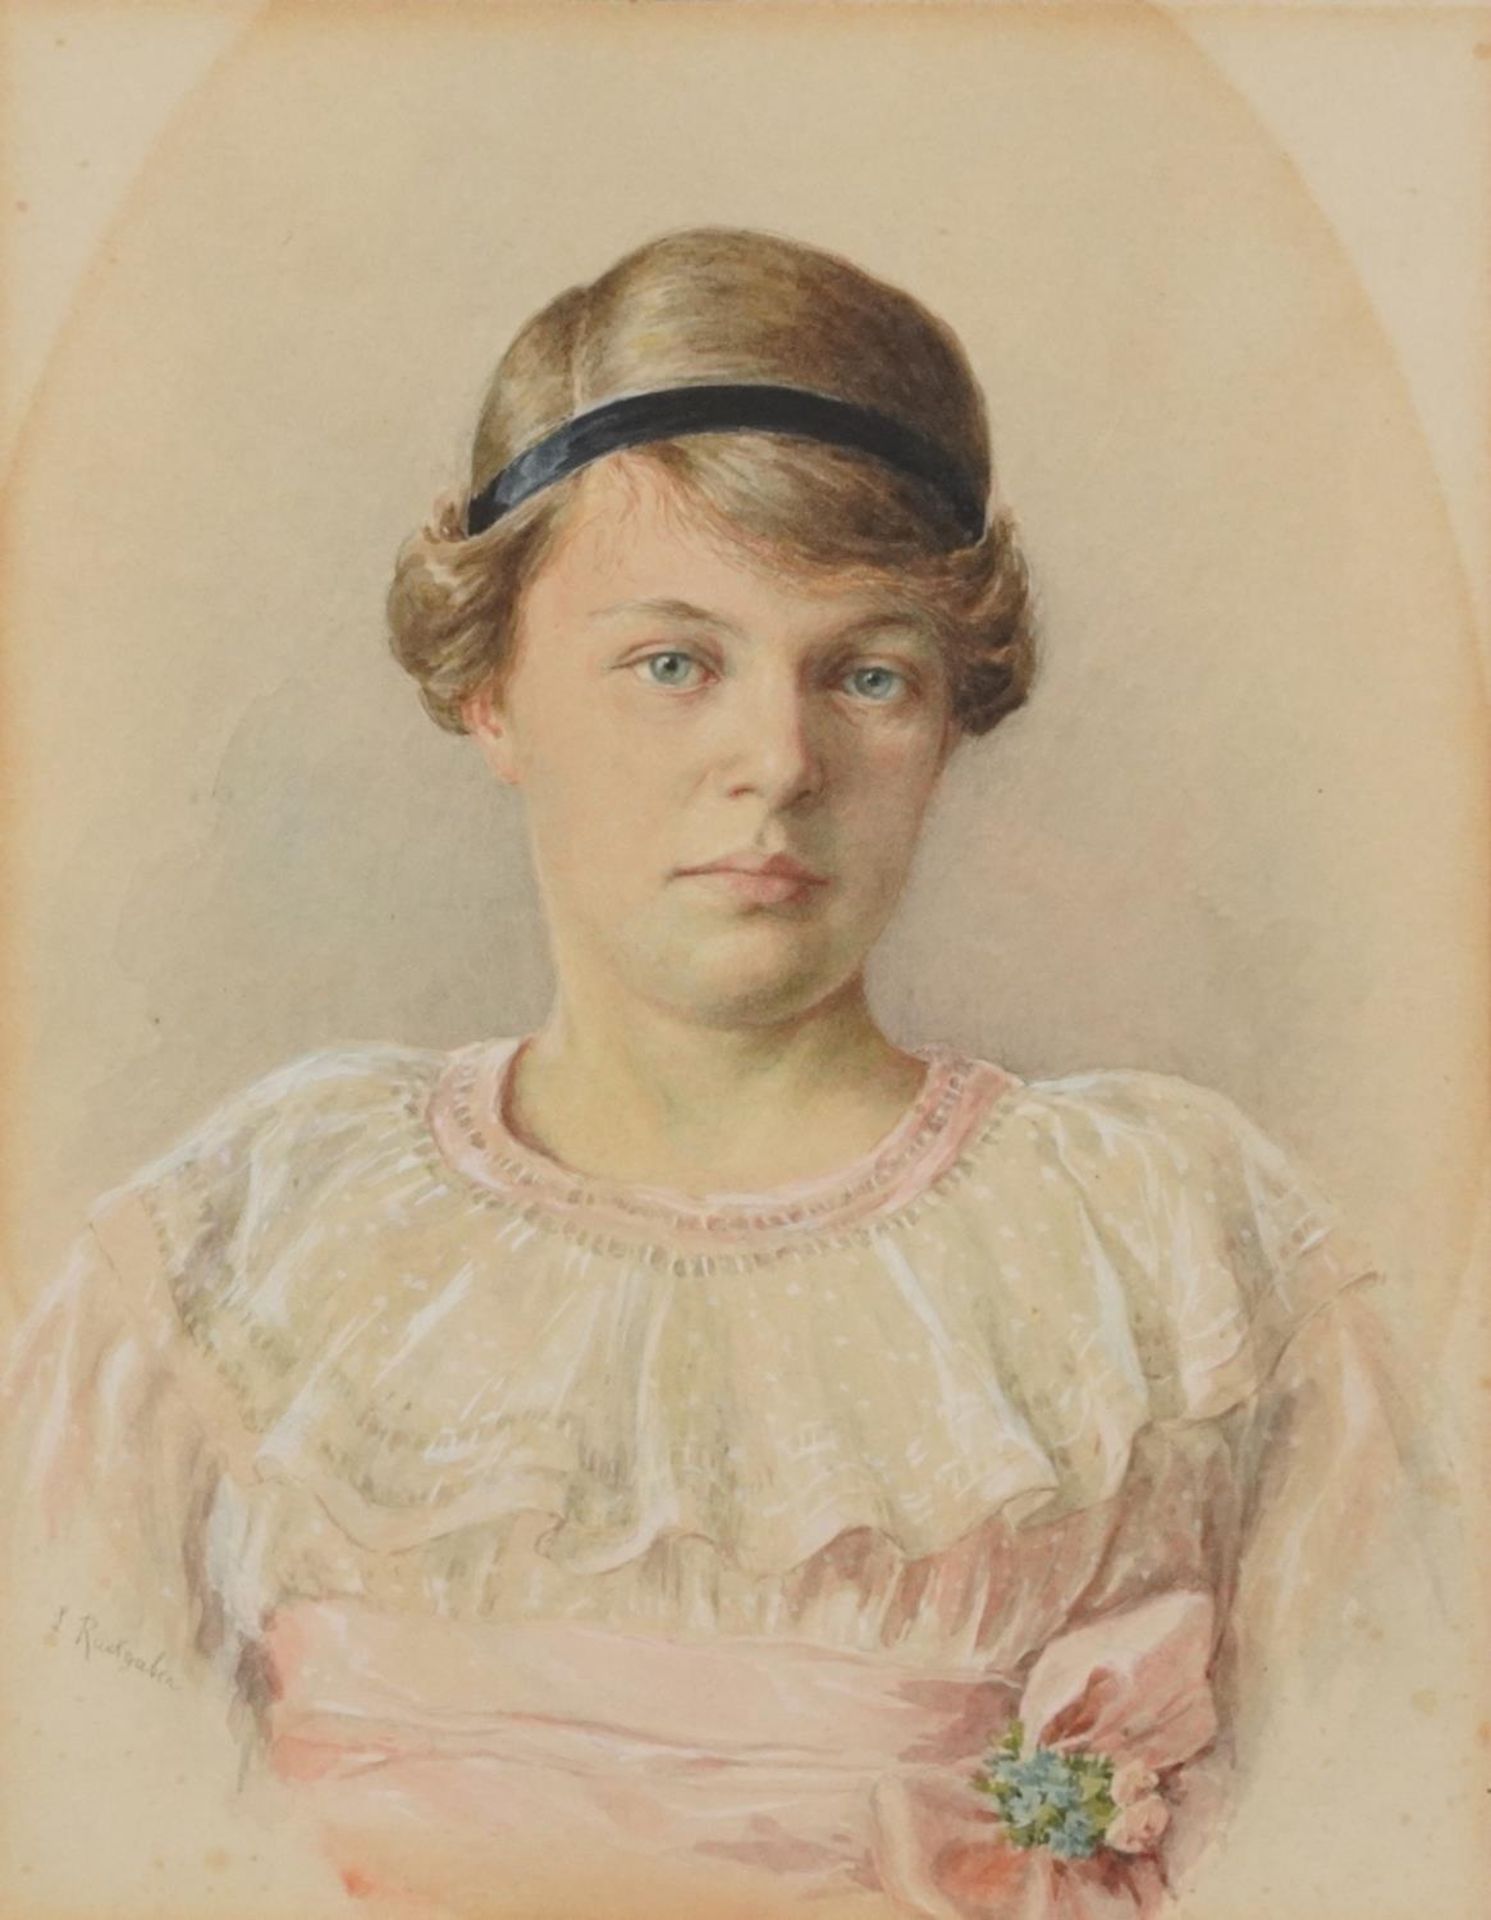 L Ruckgaber - Early 20th century head and shoulders portrait of a young female, signed